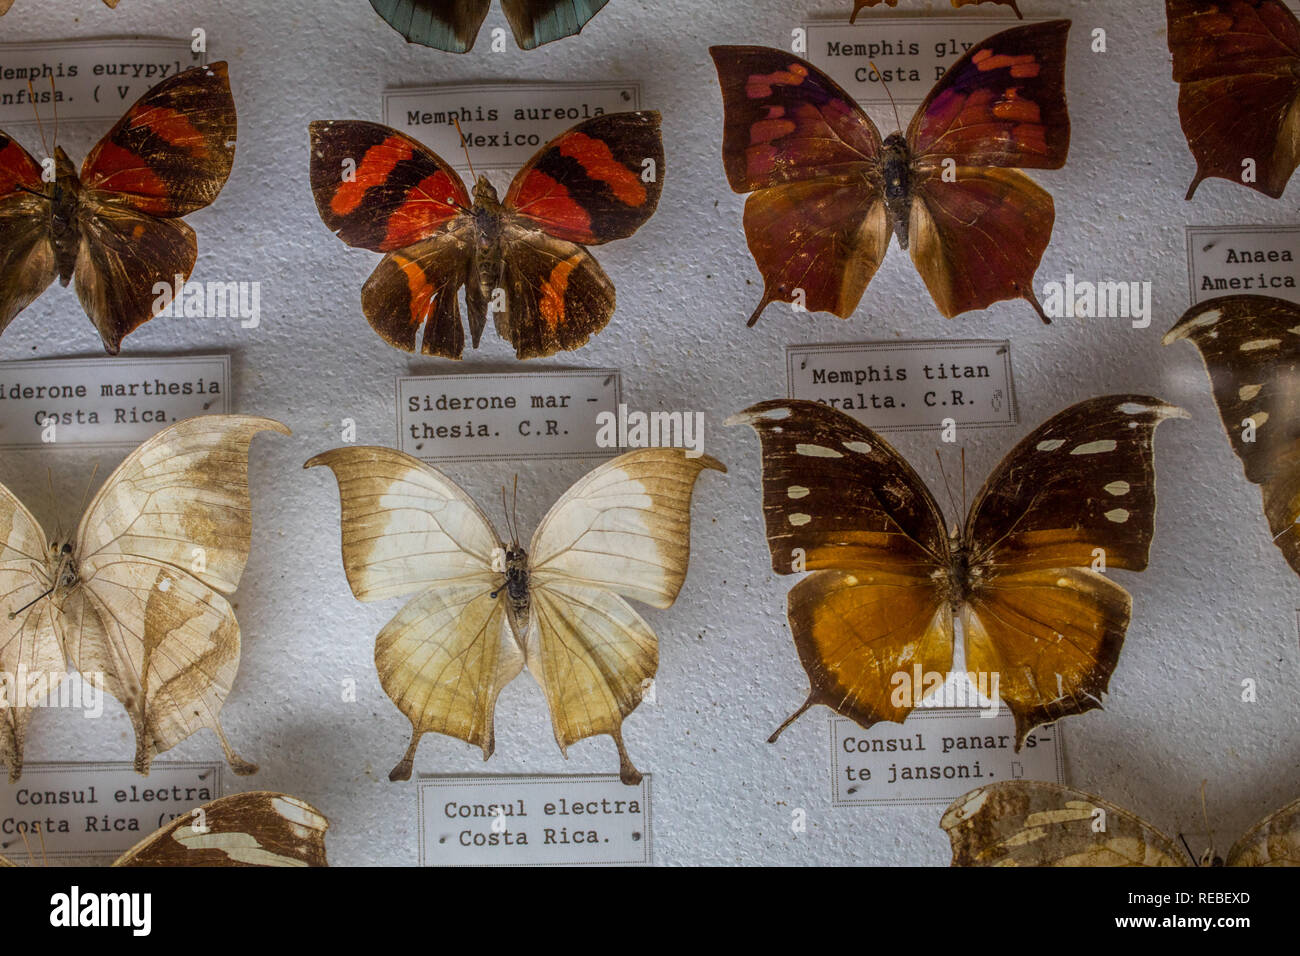 An entomological collection of beautiful pinned butterflies in a Natural History Museum. With etiquettes for identification. Stock Photo